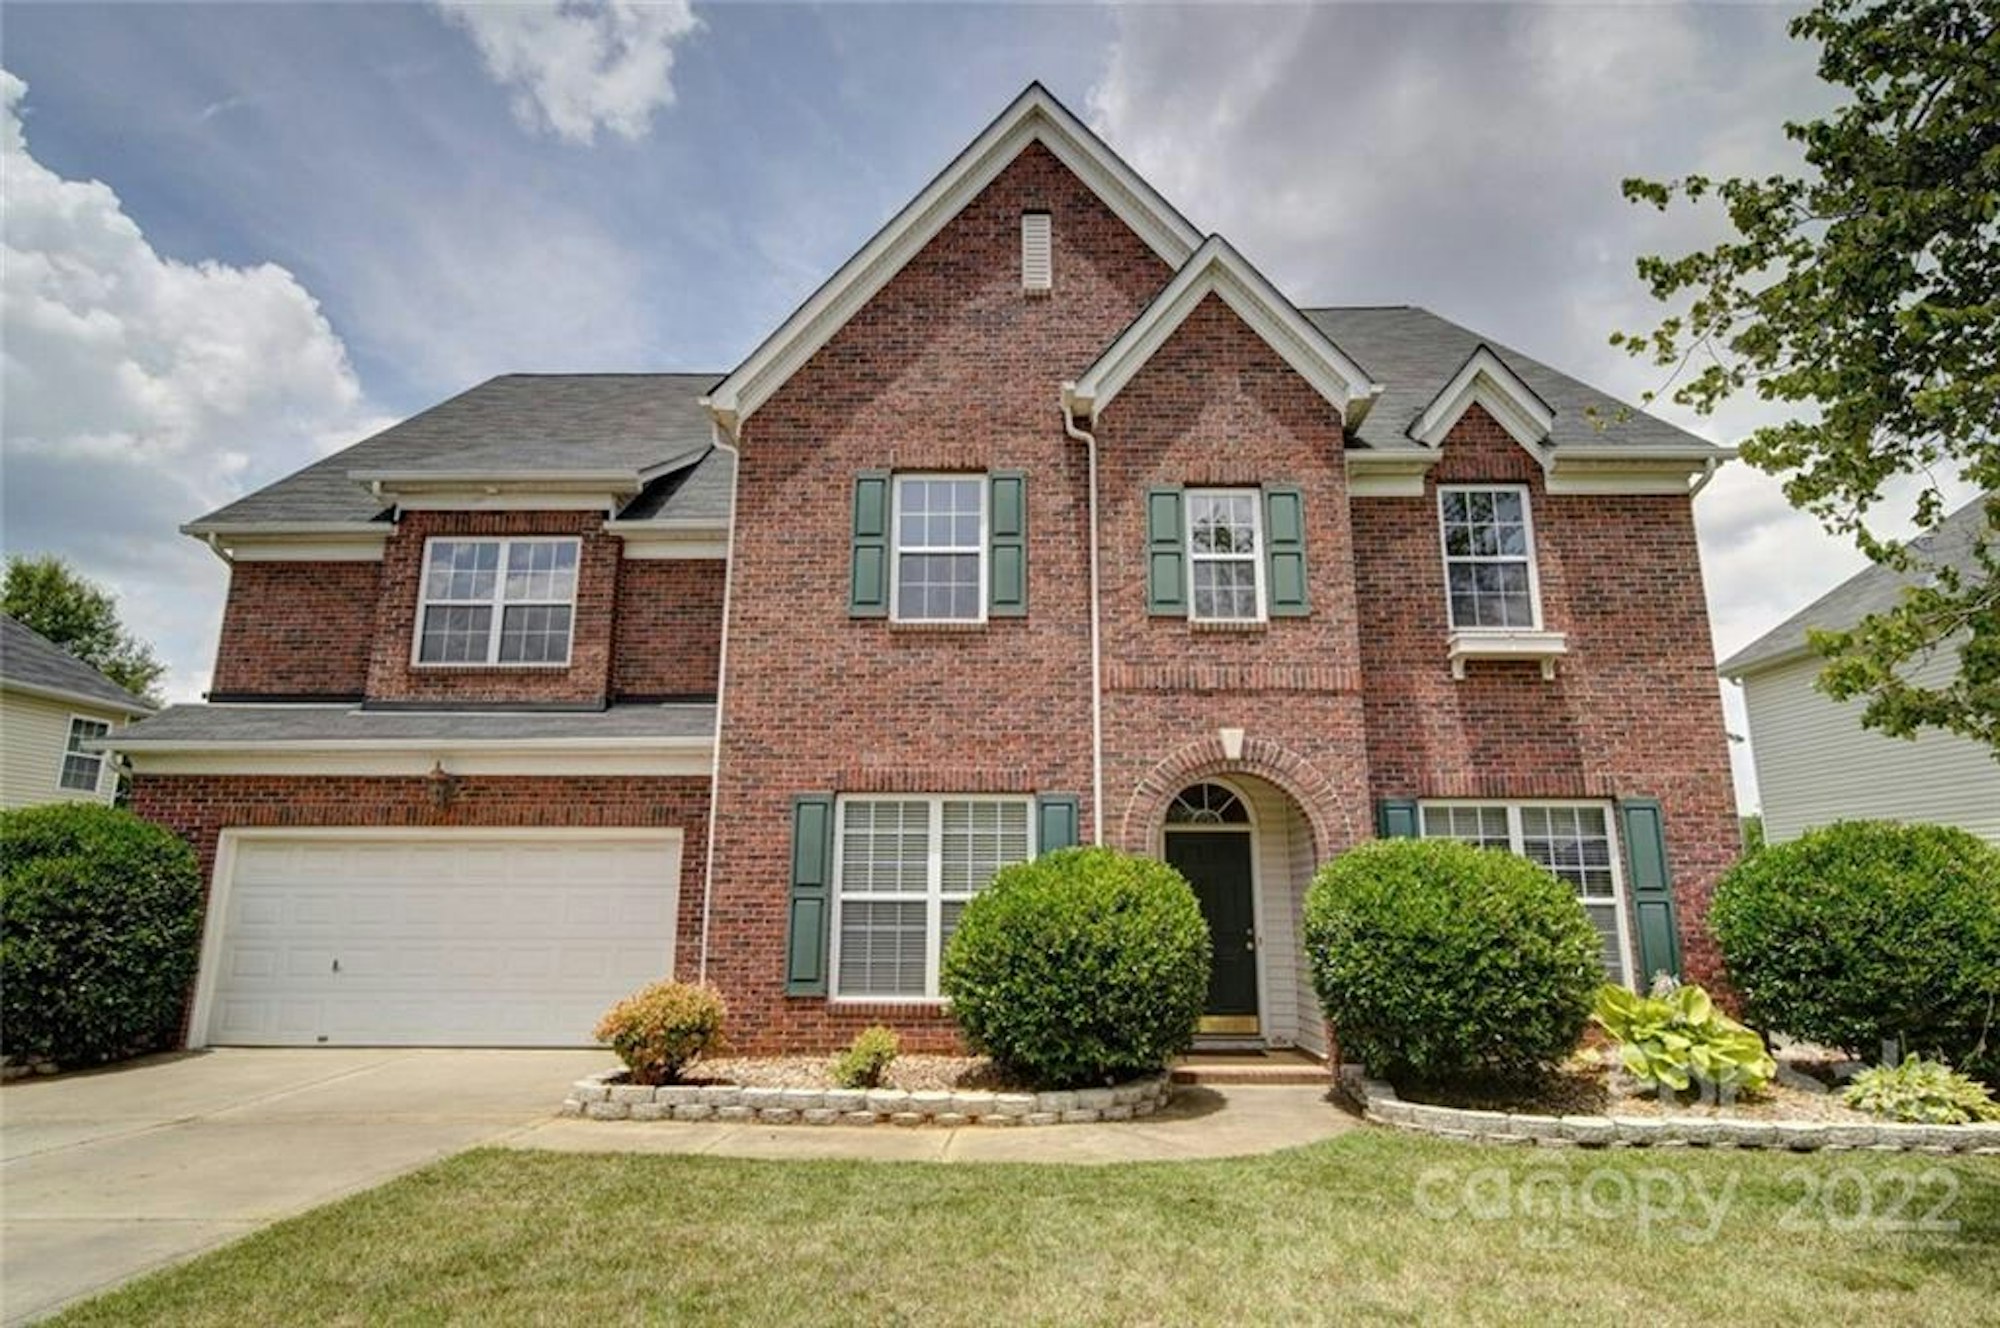 Photo 1 of 44 - 1110 Cooper Ln, Indian Trail, NC 28079